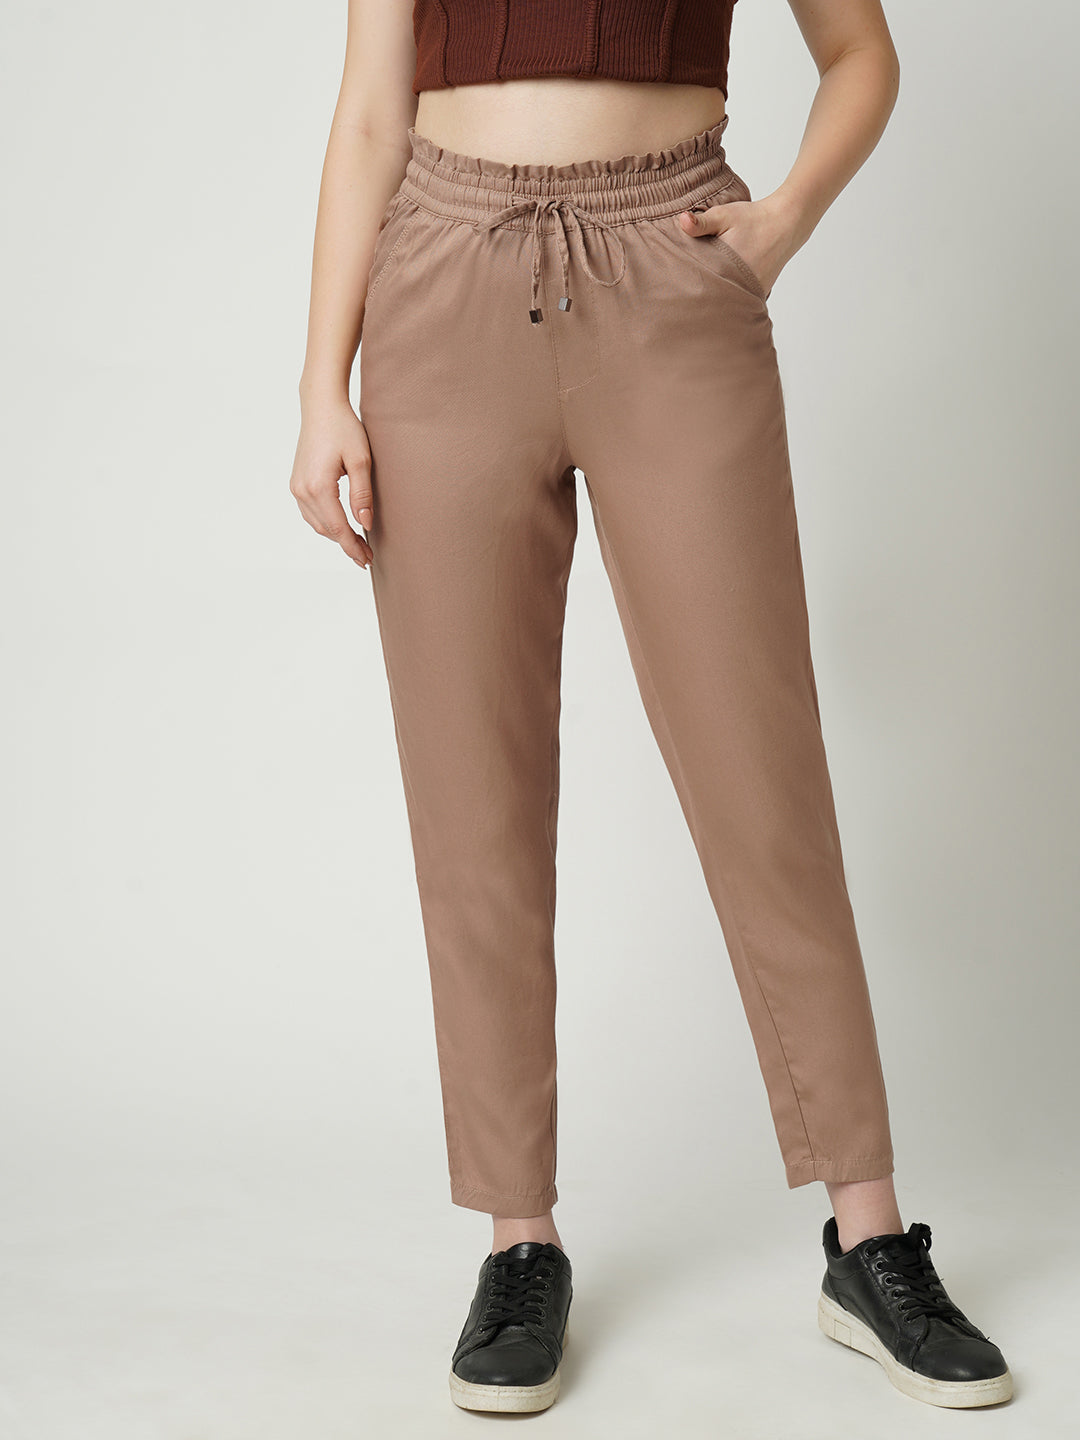 Paper Bag Trousers - Buy Paper Bag Trousers online at Best Prices in India  | Flipkart.com